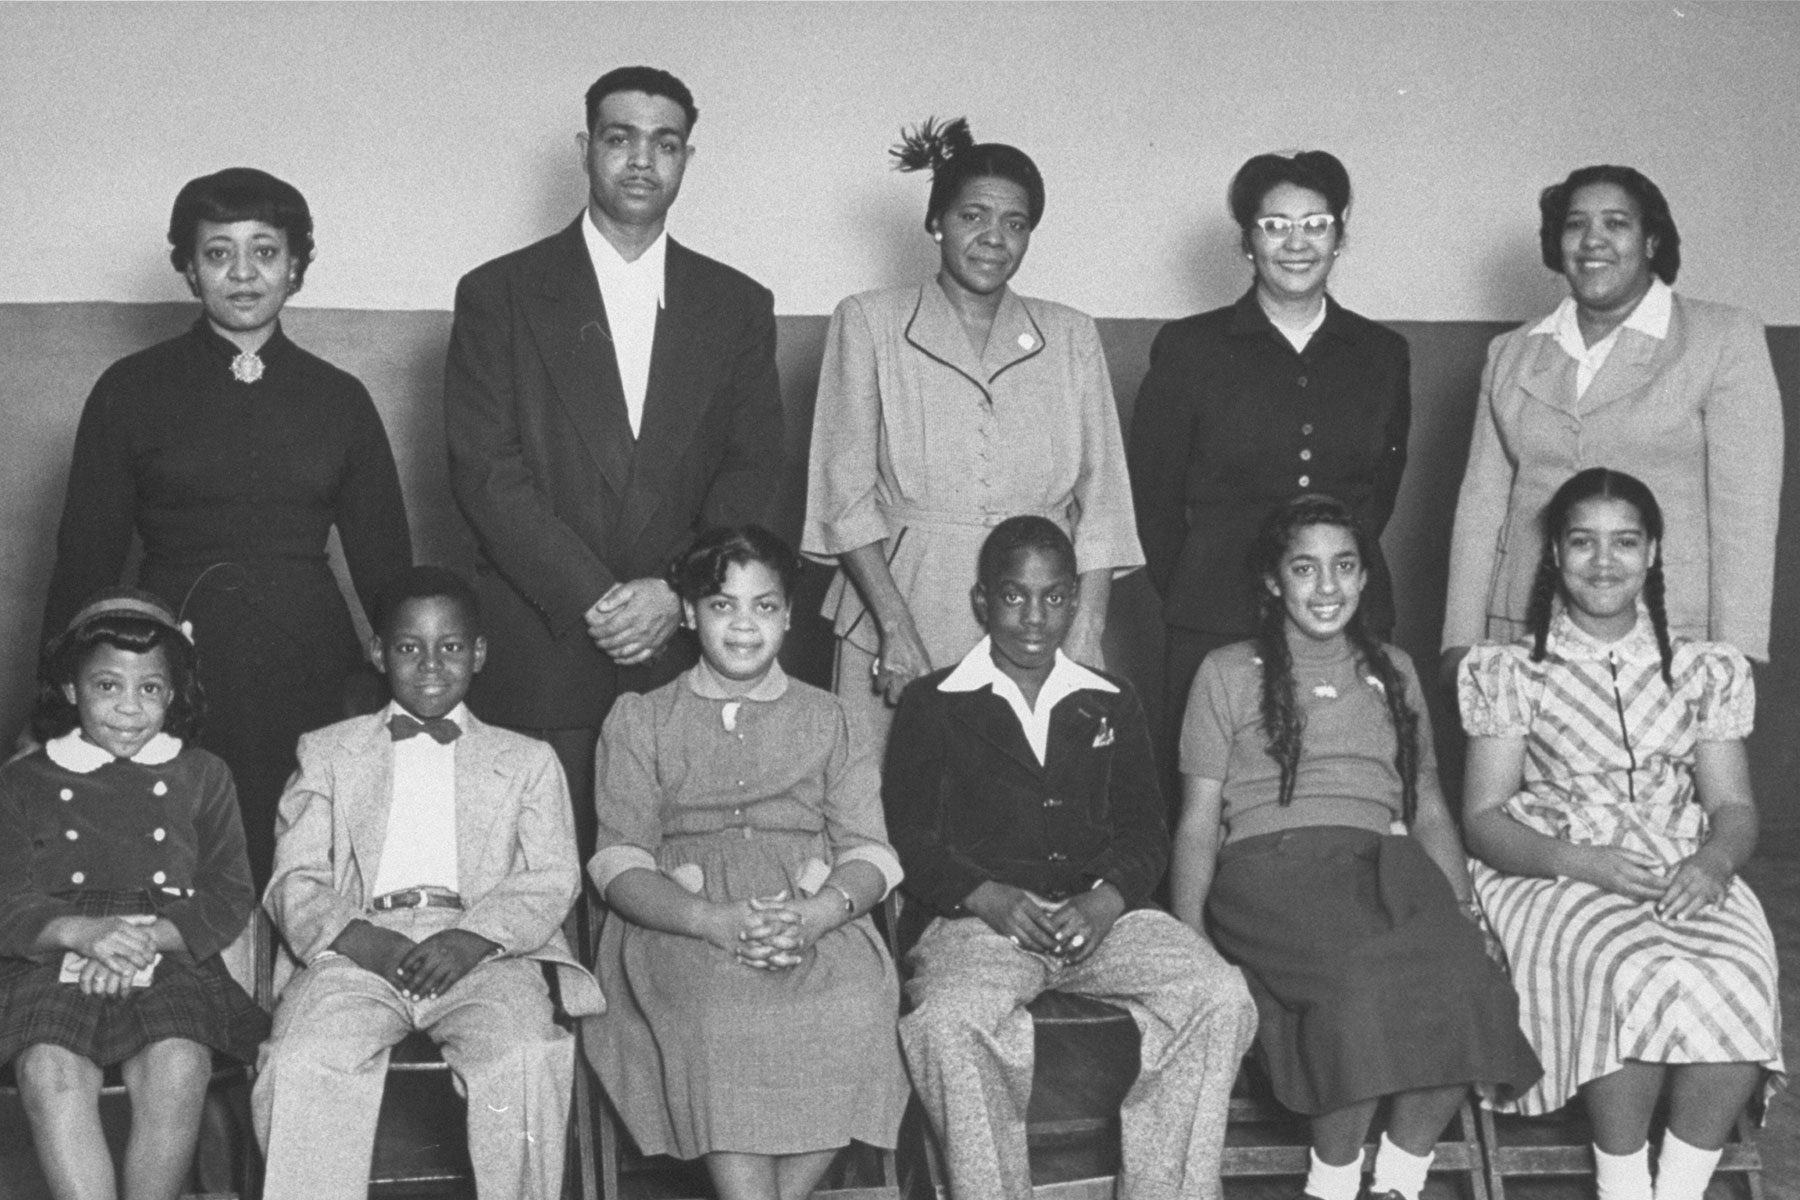 Portrait of the African-American students from the famous 'Brown vs Board of Education' case.